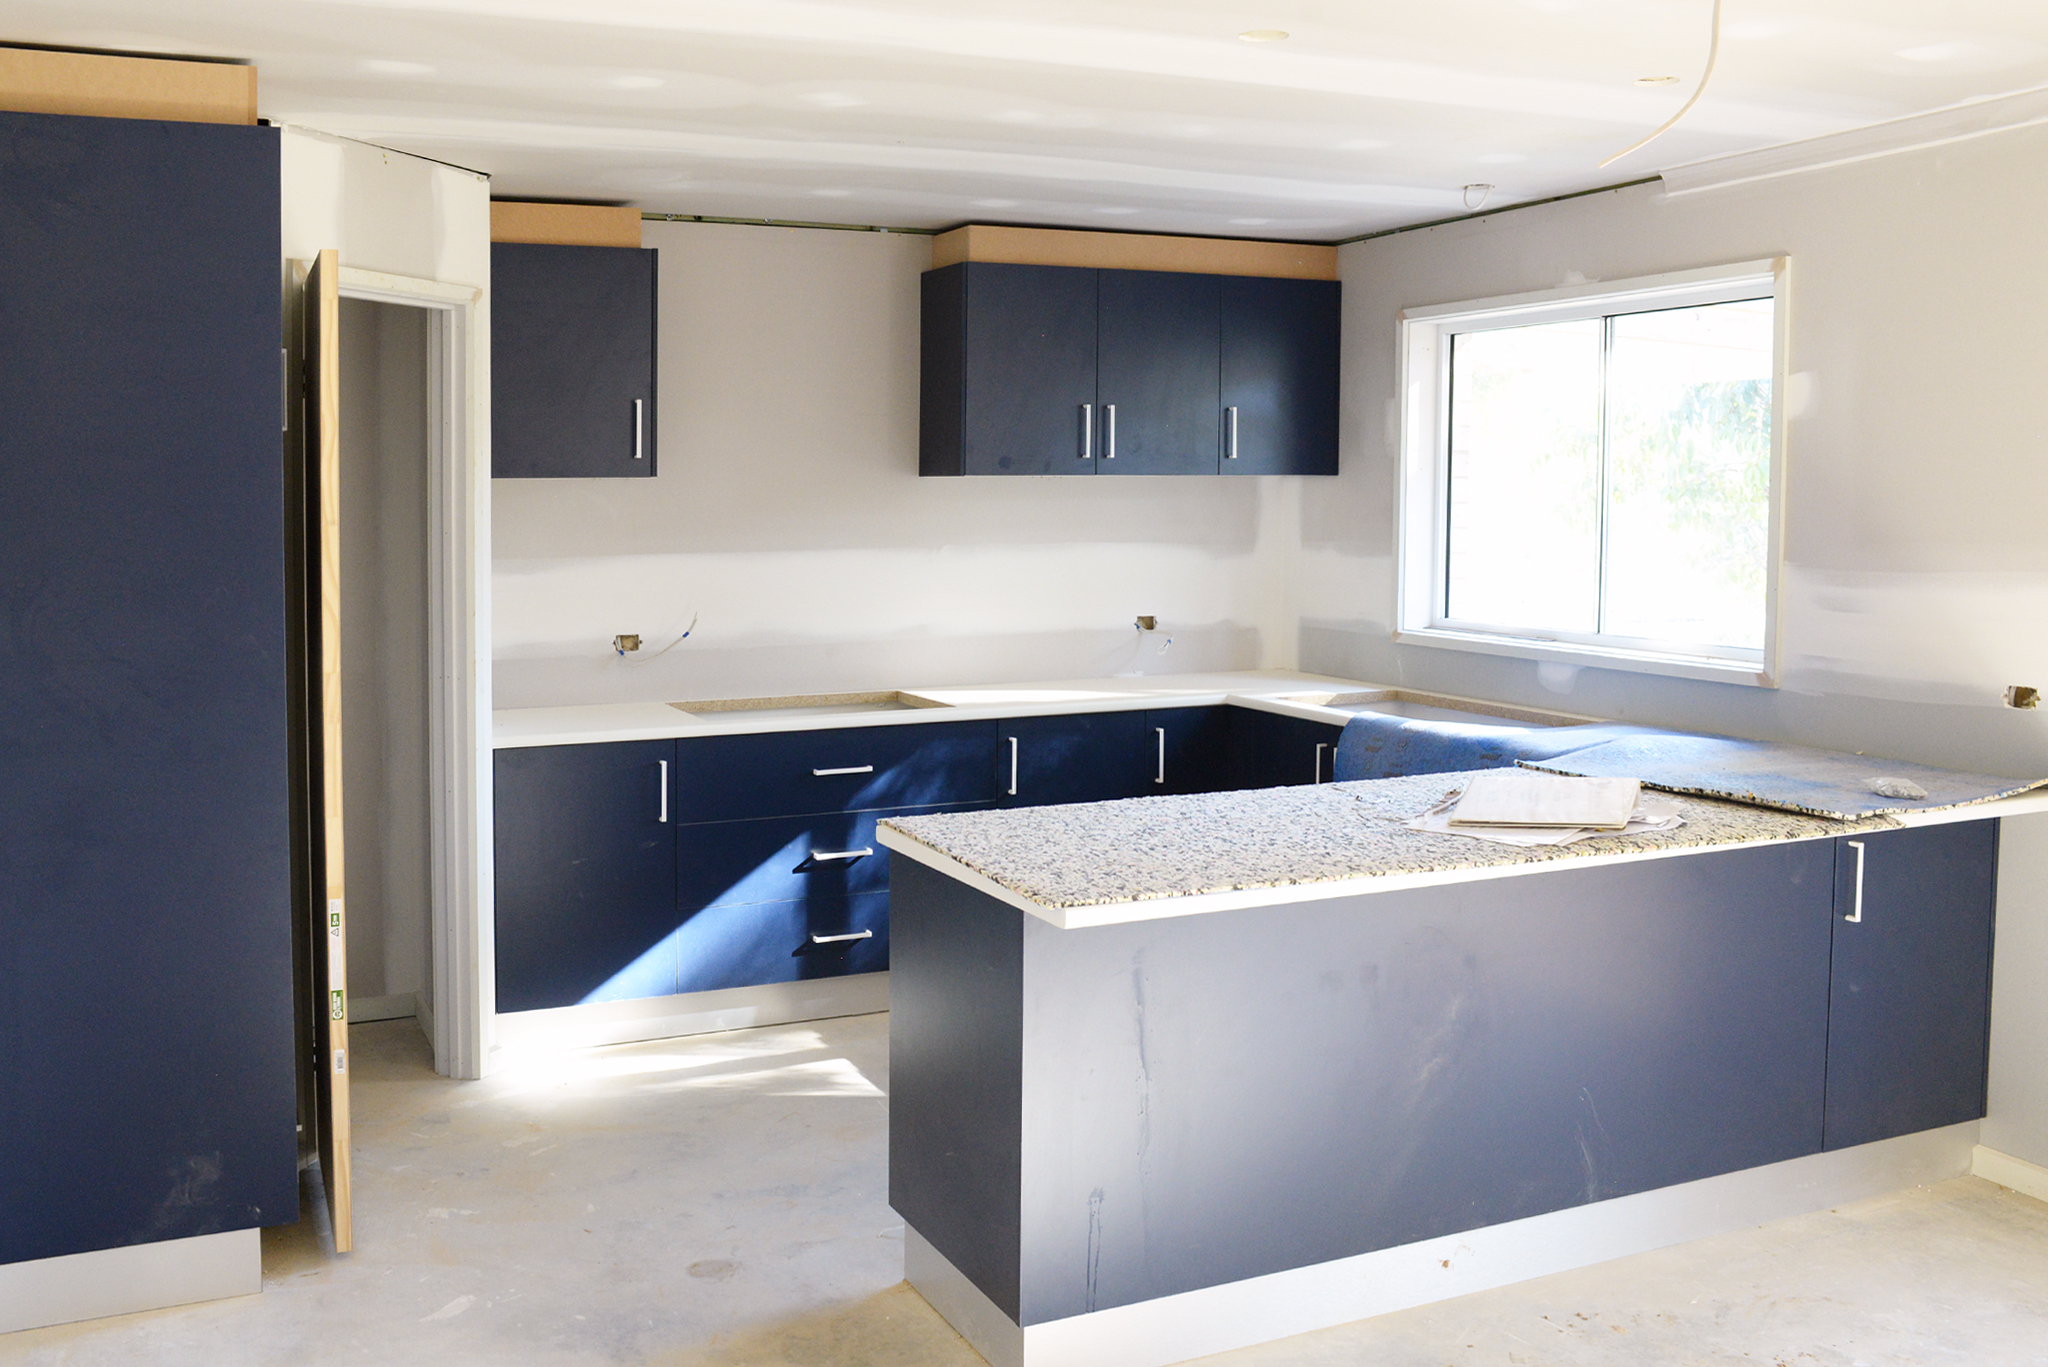 These dark blue cabinets are looking pretty striking.⁠